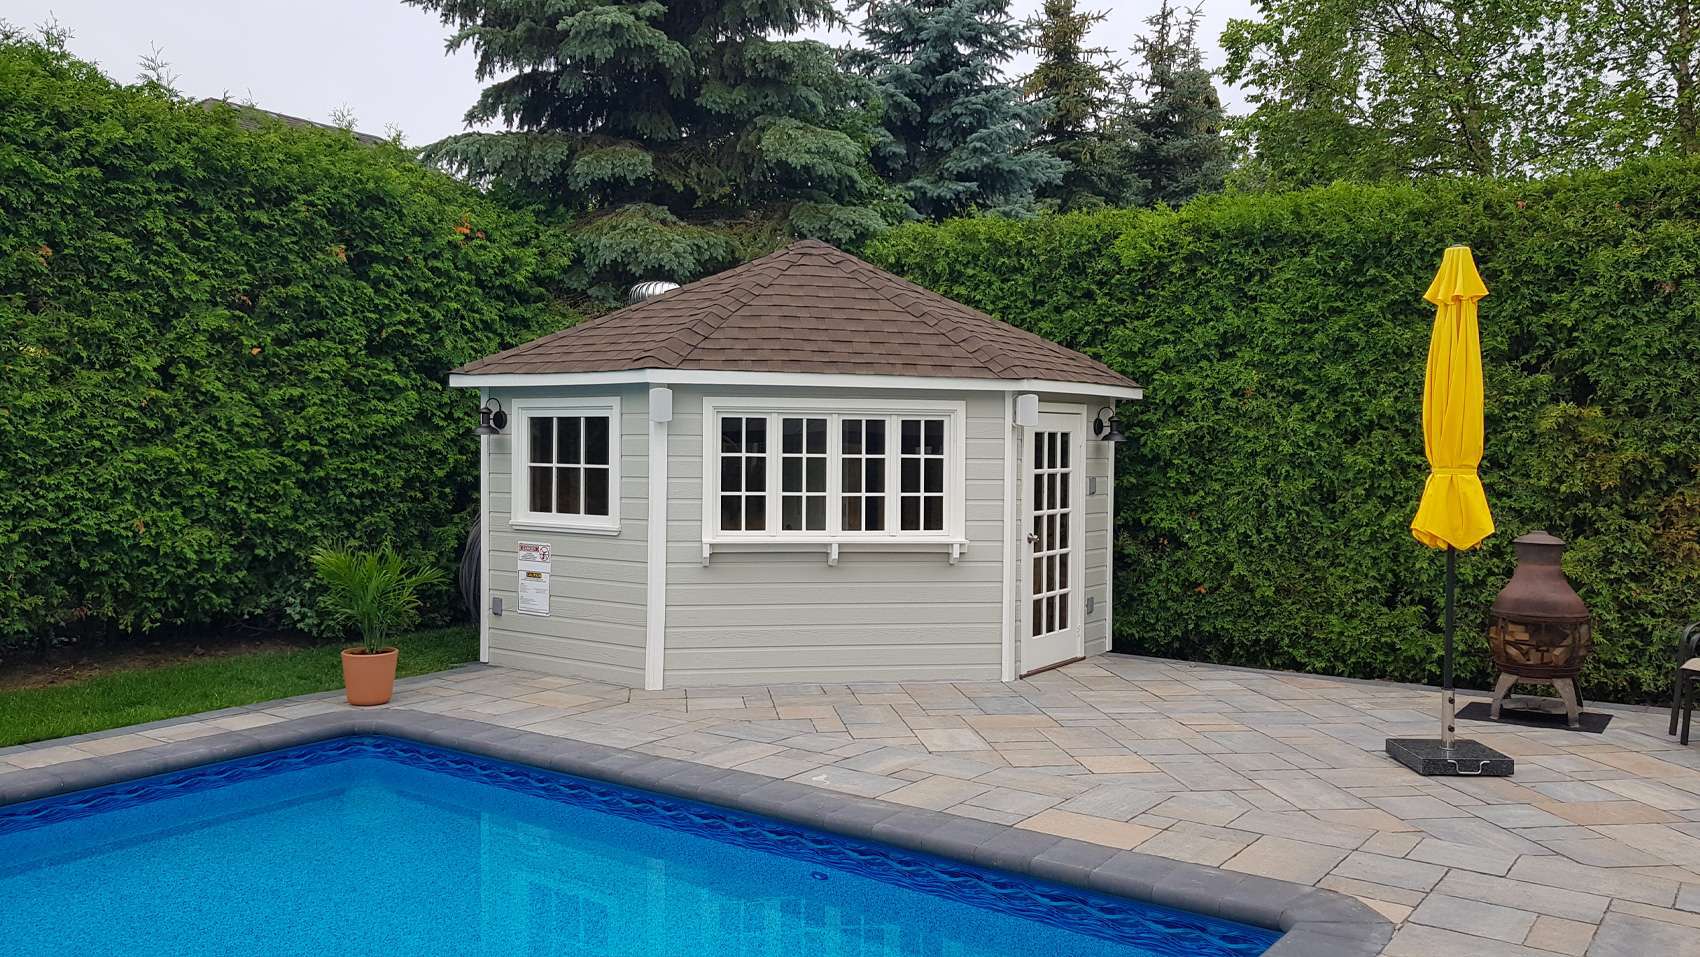 Front view of 11' Catalina Pool Cabana located in Maple, Ontario – Summerwood Products